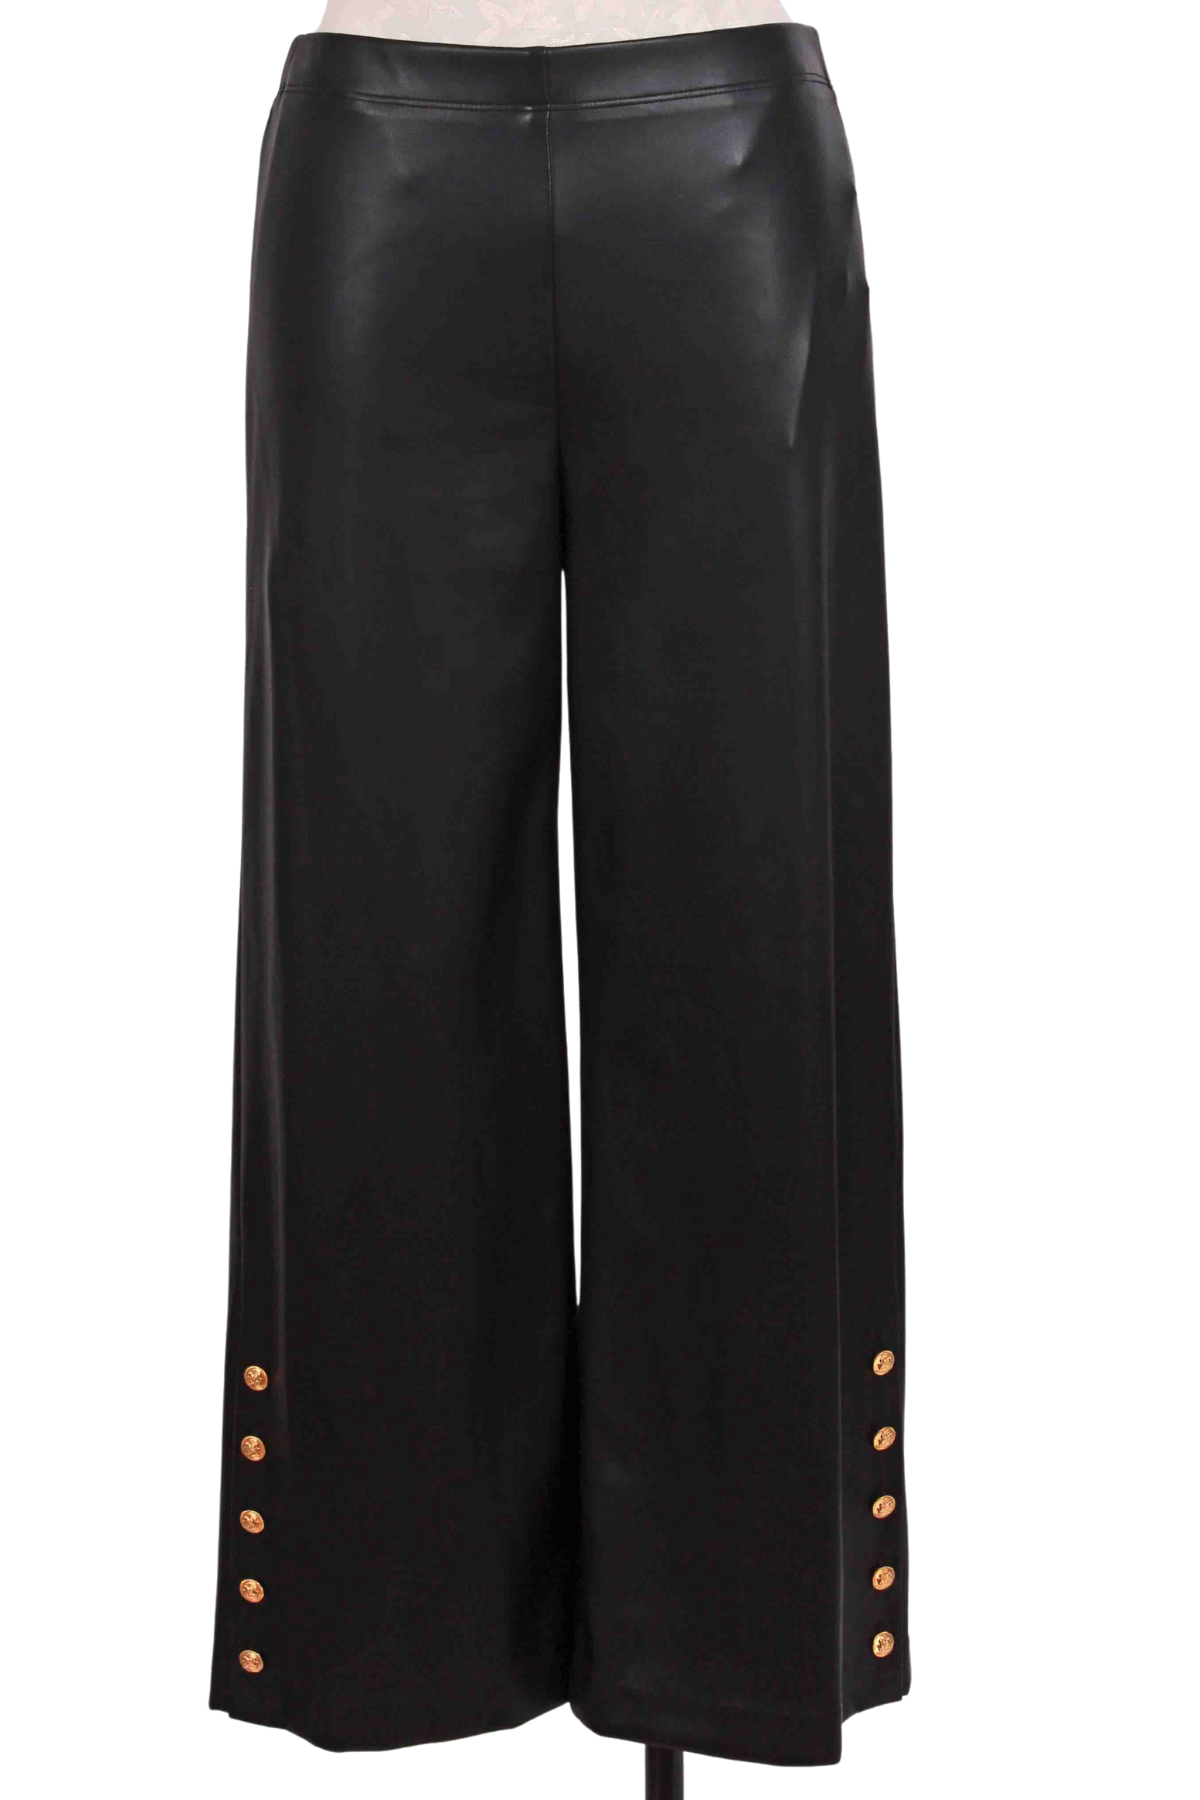 Black Soft Faux Leather Pull-On Cropped Button Up Hem Pants by Fifteen Twenty